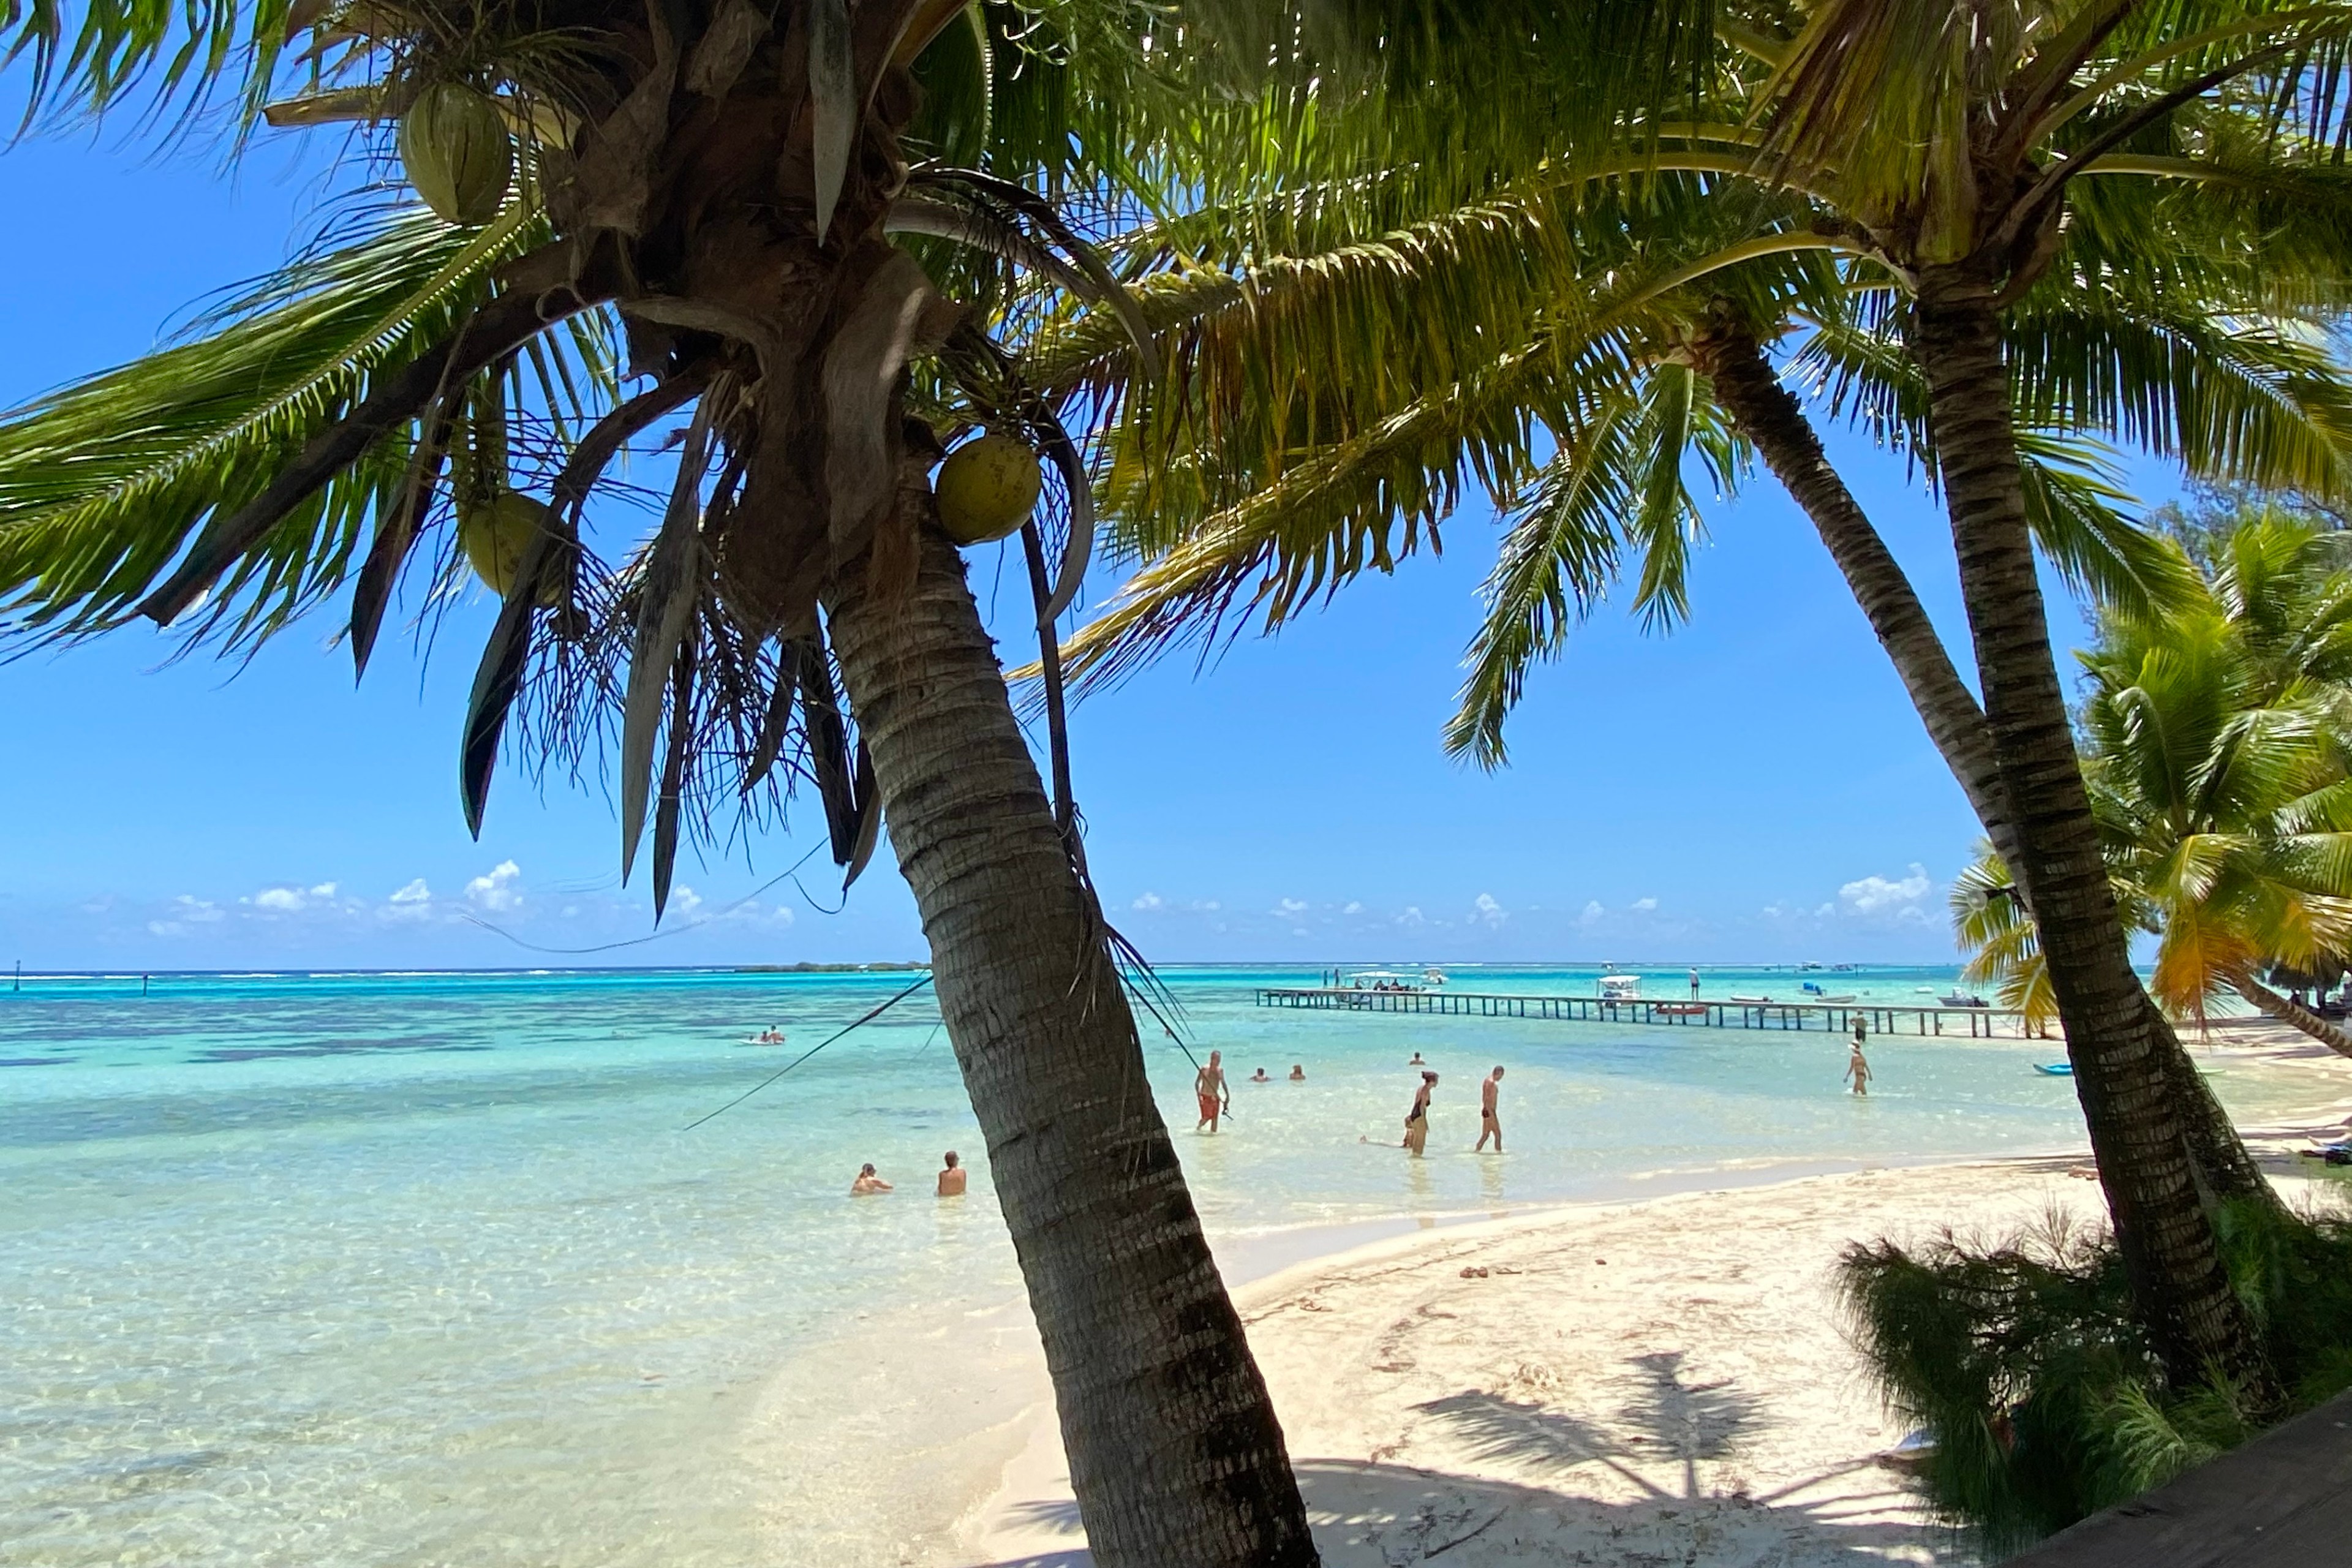 Two palm trees overlook a clear tropical beach.